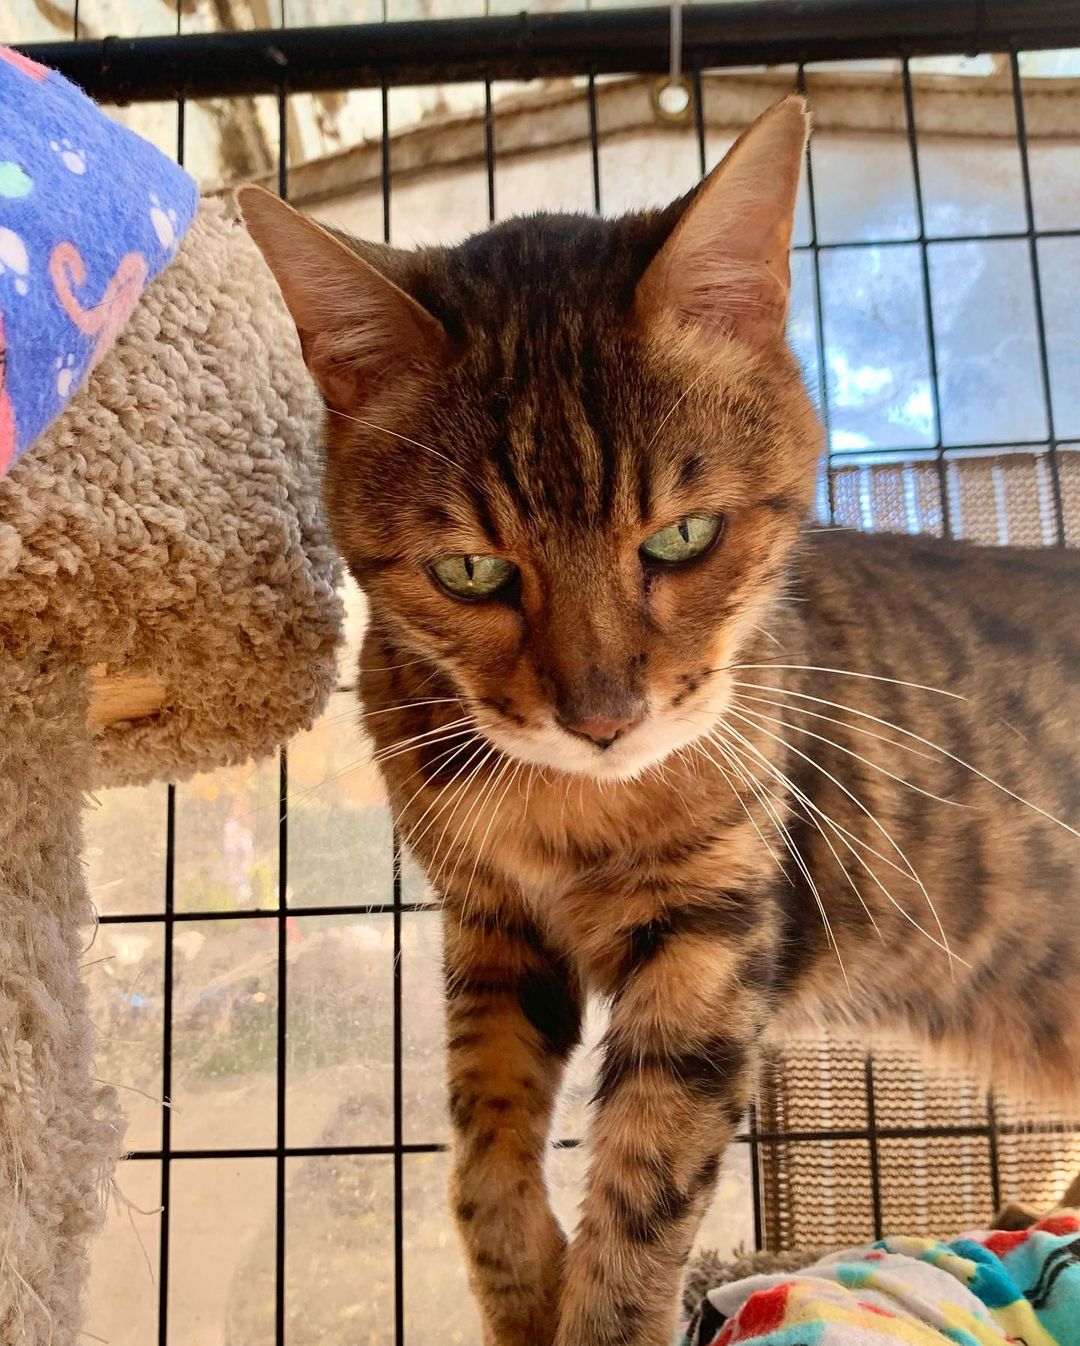 Random cuteness… meet the newest addition to the FKC family. Tiger the bangle! He can really use some extra love and attention. If you’d like to spend some time with Tiger on a weekly basis please fill out a volunteer application on our website! 
.
.
.
.
<a target='_blank' href='https://www.instagram.com/explore/tags/fatkittycity/'>#fatkittycity</a> <a target='_blank' href='https://www.instagram.com/explore/tags/sanctuarylife/'>#sanctuarylife</a> <a target='_blank' href='https://www.instagram.com/explore/tags/gato/'>#gato</a> <a target='_blank' href='https://www.instagram.com/explore/tags/kitty/'>#kitty</a> <a target='_blank' href='https://www.instagram.com/explore/tags/fatkittycitysanctuary/'>#fatkittycitysanctuary</a> <a target='_blank' href='https://www.instagram.com/explore/tags/rescuecatsofinstagram/'>#rescuecatsofinstagram</a> <a target='_blank' href='https://www.instagram.com/explore/tags/catlovers/'>#catlovers</a> <a target='_blank' href='https://www.instagram.com/explore/tags/rescuecatsrule/'>#rescuecatsrule</a> <a target='_blank' href='https://www.instagram.com/explore/tags/catsfollowers/'>#catsfollowers</a> <a target='_blank' href='https://www.instagram.com/explore/tags/instacatgram/'>#instacatgram</a> <a target='_blank' href='https://www.instagram.com/explore/tags/rescuecat/'>#rescuecat</a> <a target='_blank' href='https://www.instagram.com/explore/tags/adoptcats/'>#adoptcats</a> <a target='_blank' href='https://www.instagram.com/explore/tags/kedi/'>#kedi</a> <a target='_blank' href='https://www.instagram.com/explore/tags/kotek/'>#kotek</a> <a target='_blank' href='https://www.instagram.com/explore/tags/petlover/'>#petlover</a> <a target='_blank' href='https://www.instagram.com/explore/tags/beautifulcat/'>#beautifulcat</a> <a target='_blank' href='https://www.instagram.com/explore/tags/meowmeow/'>#meowmeow</a> <a target='_blank' href='https://www.instagram.com/explore/tags/foreverhome/'>#foreverhome</a> <a target='_blank' href='https://www.instagram.com/explore/tags/rescuekitties/'>#rescuekitties</a> <a target='_blank' href='https://www.instagram.com/explore/tags/eldoradohillscats/'>#eldoradohillscats</a> <a target='_blank' href='https://www.instagram.com/explore/tags/bengalcat/'>#bengalcat</a> <a target='_blank' href='https://www.instagram.com/explore/tags/bengals/'>#bengals</a> <a target='_blank' href='https://www.instagram.com/explore/tags/catsanctuary/'>#catsanctuary</a>